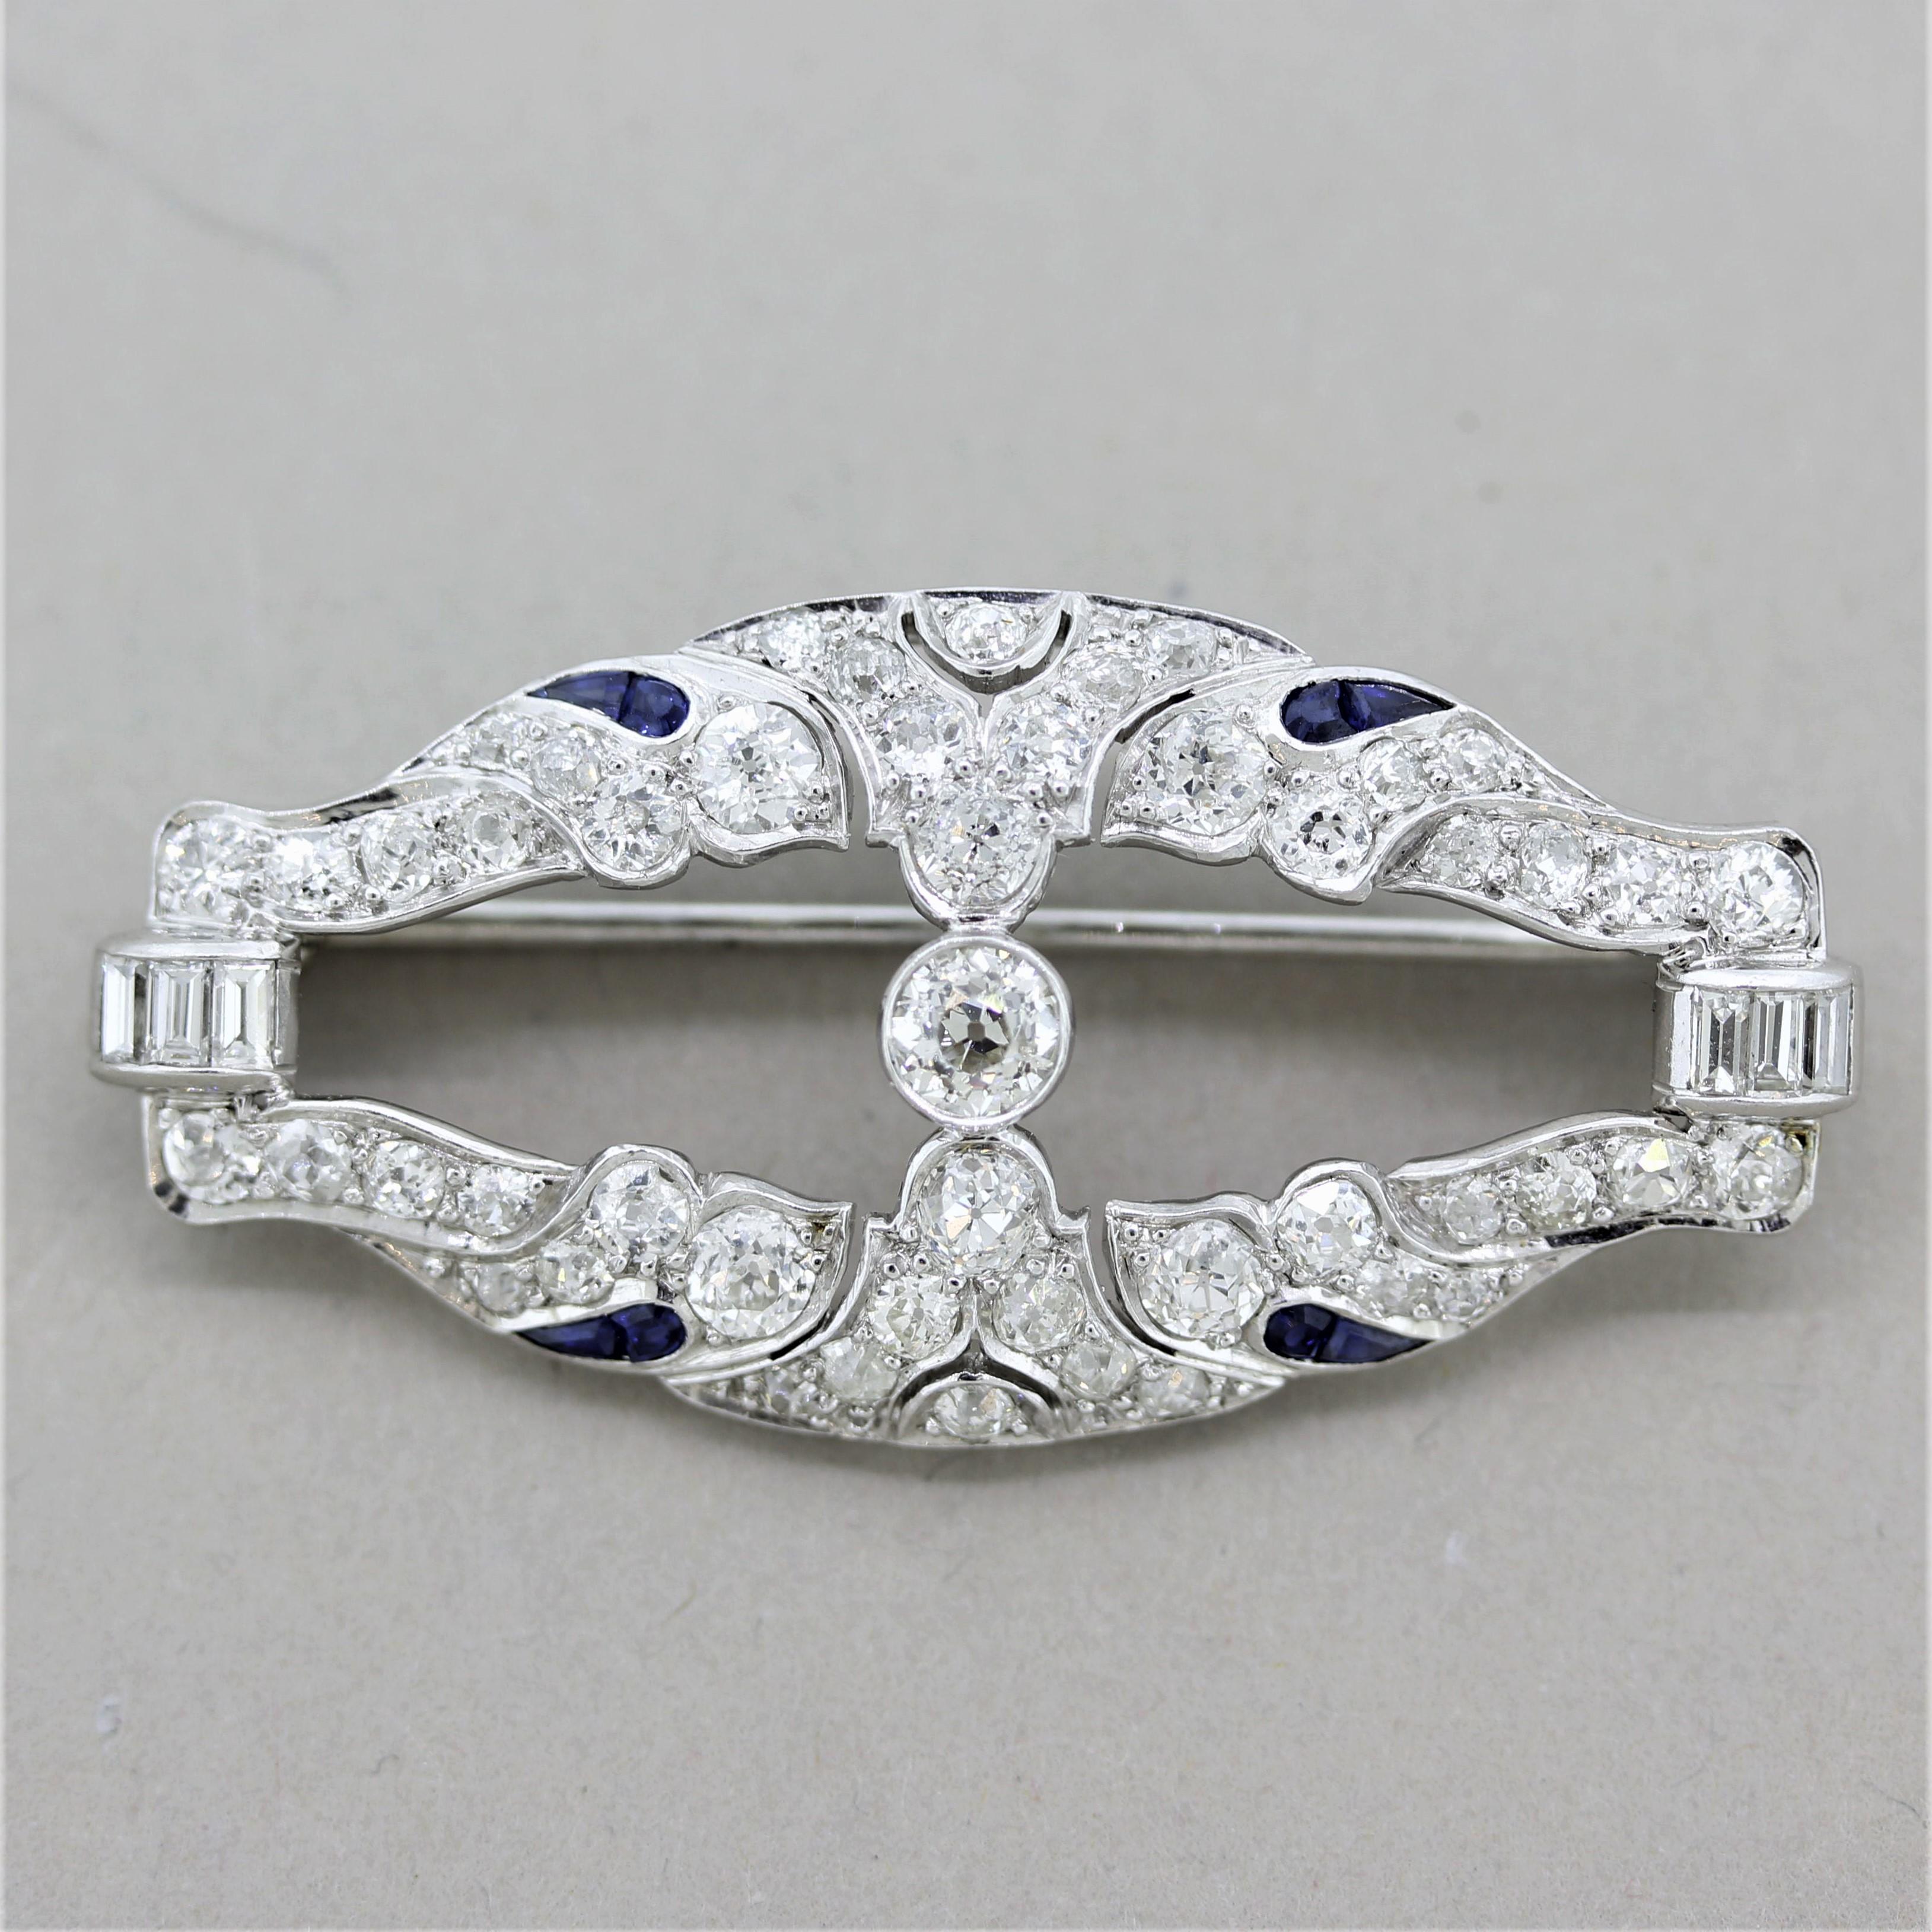 An original Art Deco antique, circa 1920’s, by Lambert Bros. The lovely brooch features approximately 3 carats of fine bright white European-cut diamonds along with blue sapphire accents. Hand-fabricated in platinum, a beautiful piece that will